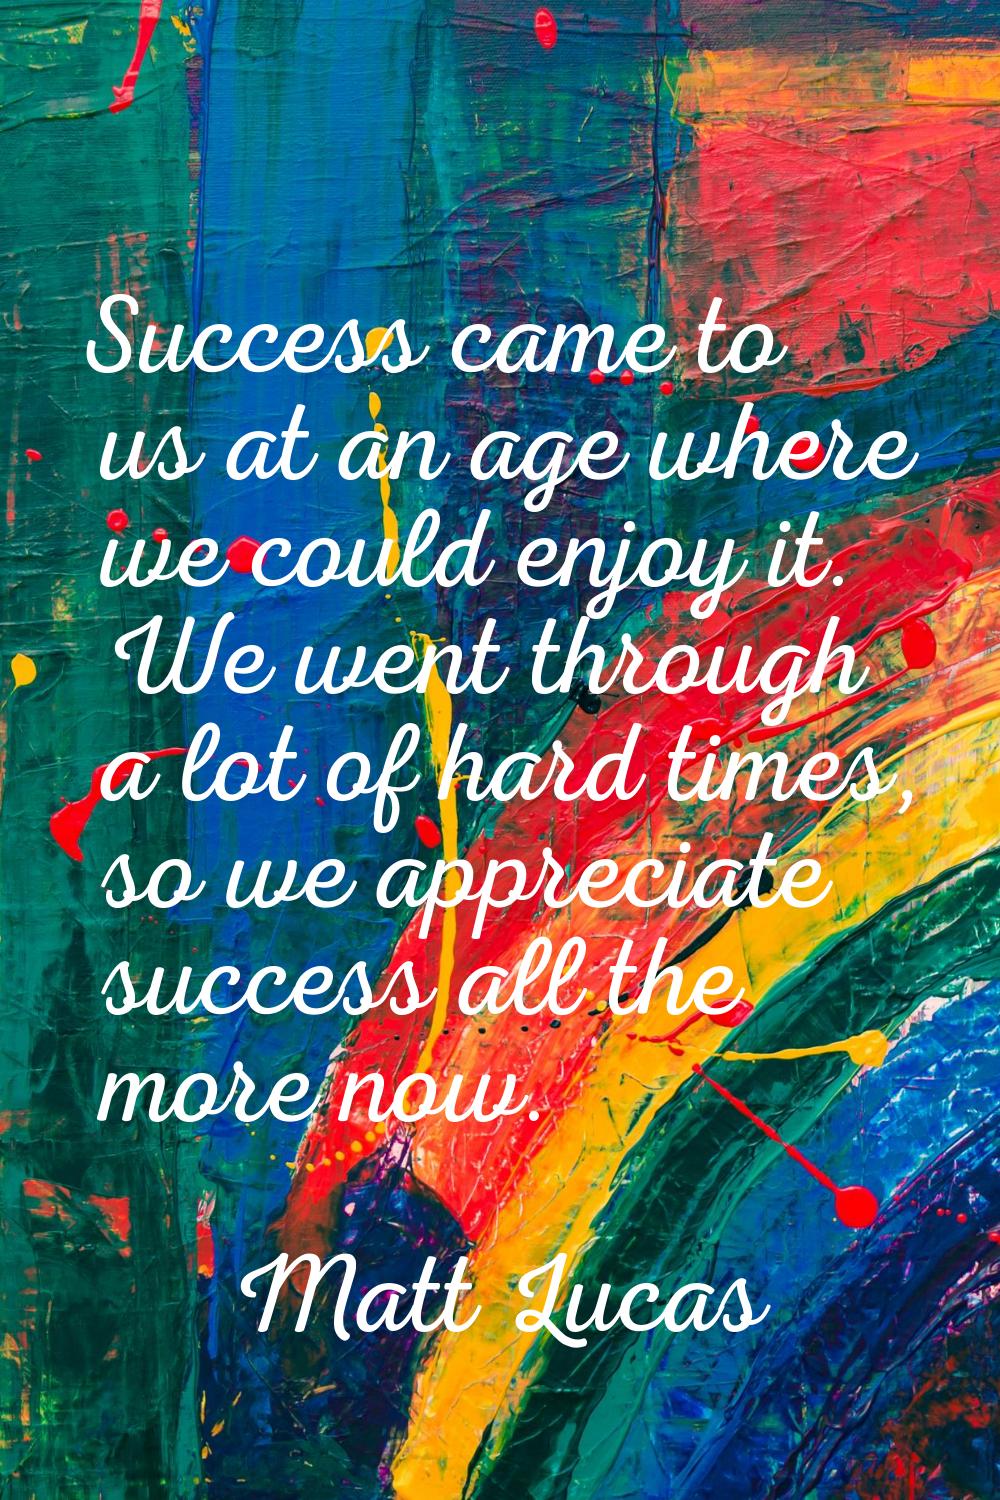 Success came to us at an age where we could enjoy it. We went through a lot of hard times, so we ap